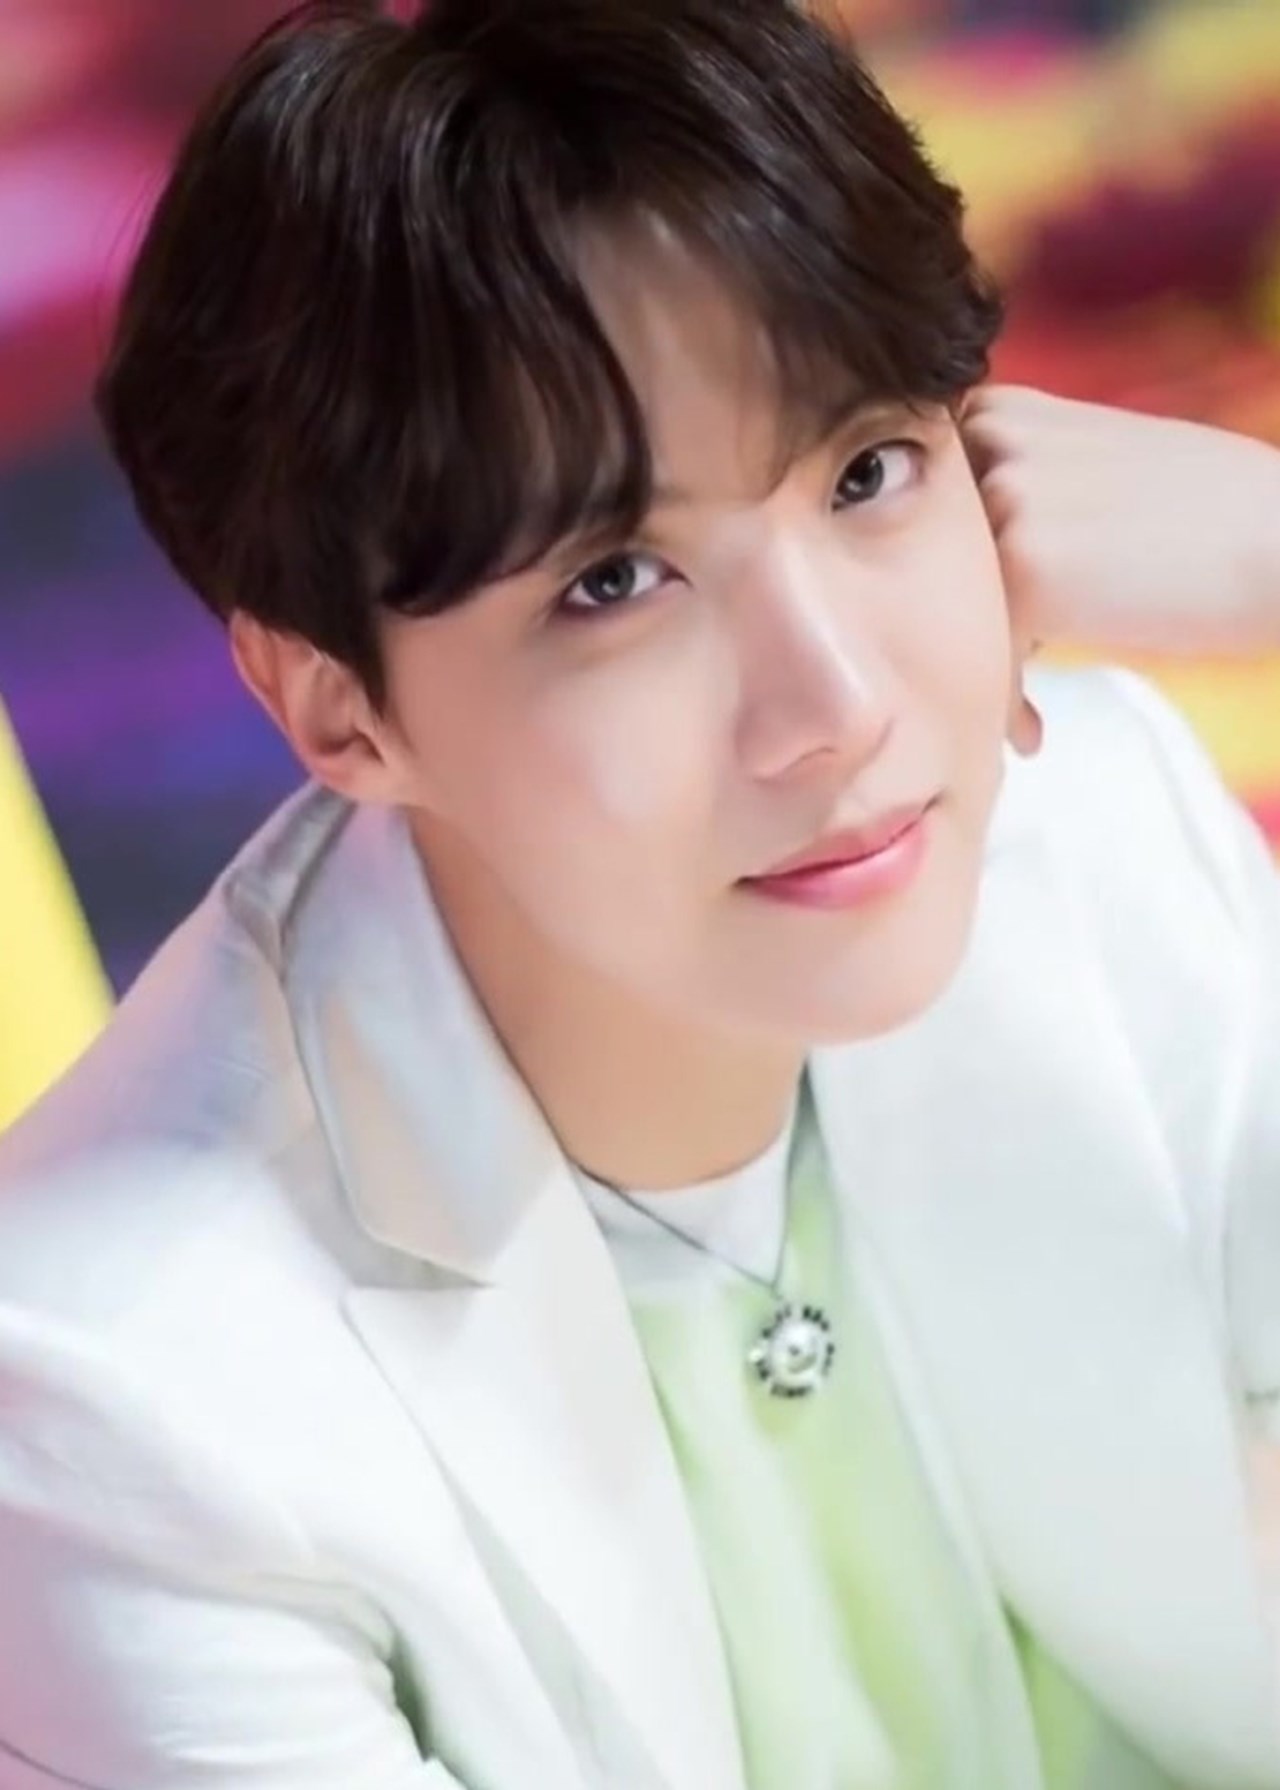 BTS star J-Hope is signing up for mandatory military service - KESQ